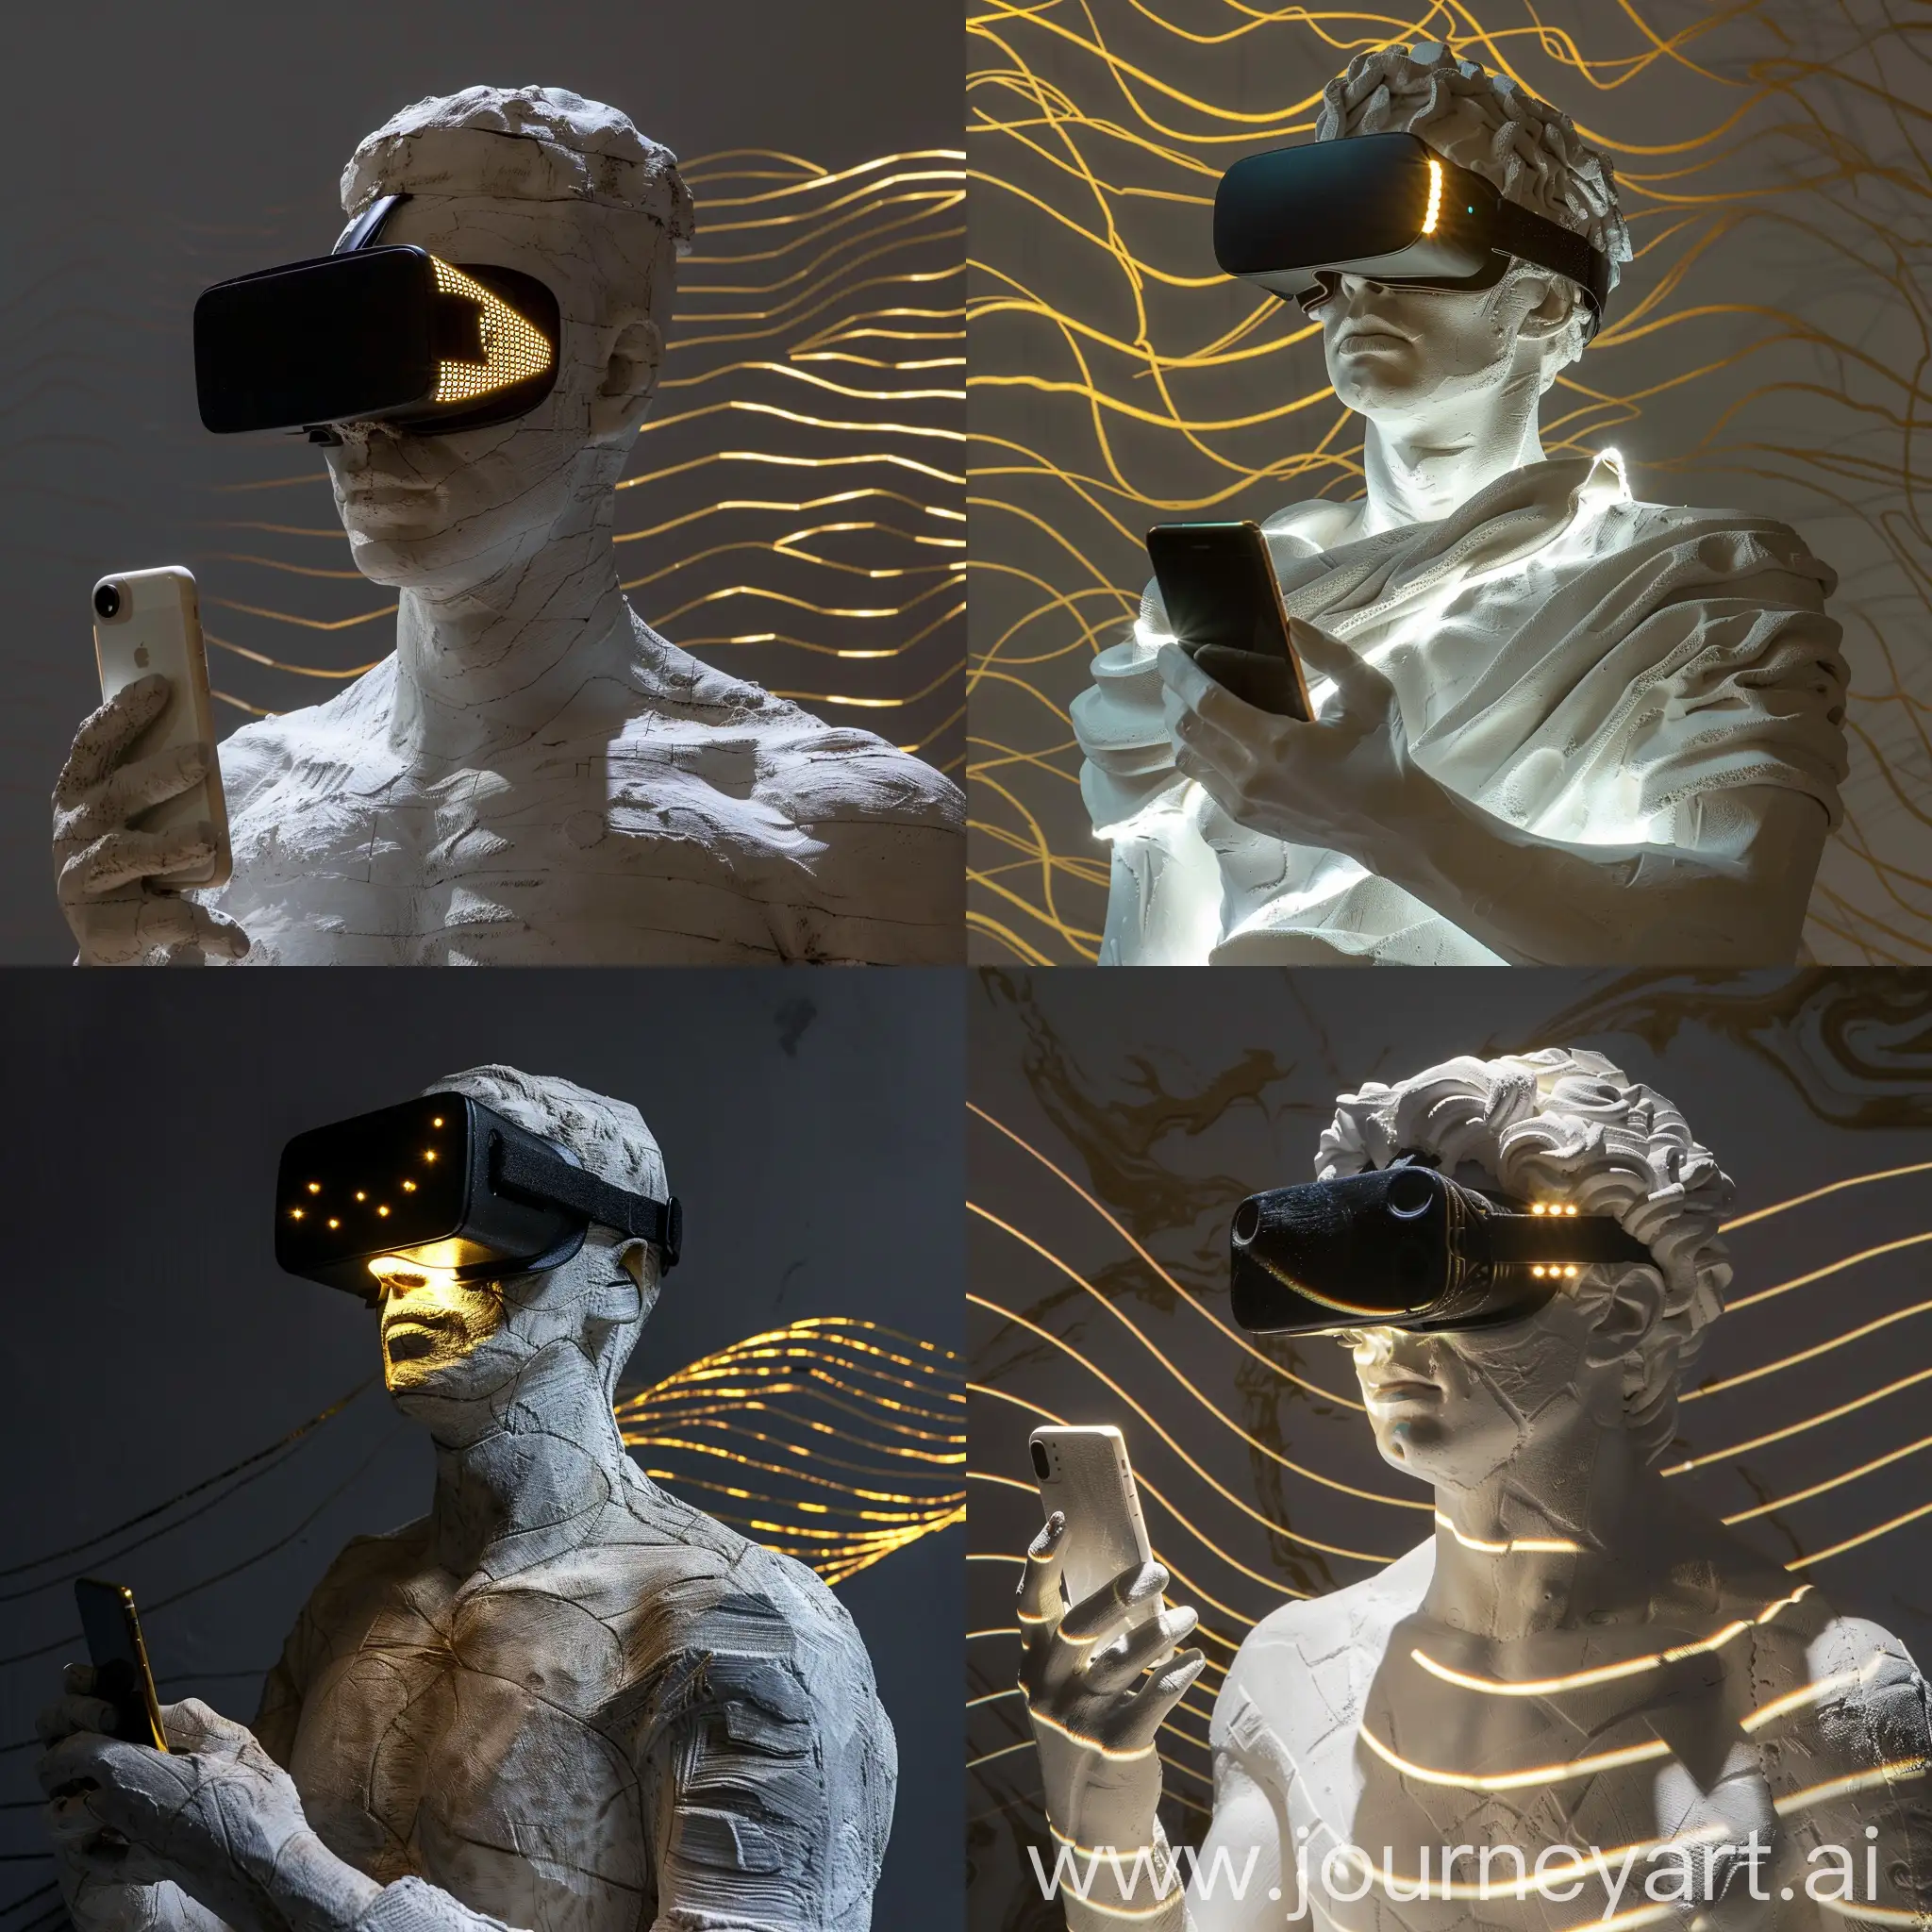 Modern-Man-Sculpture-with-VR-Glasses-and-iPhone-in-Dreamy-Setting